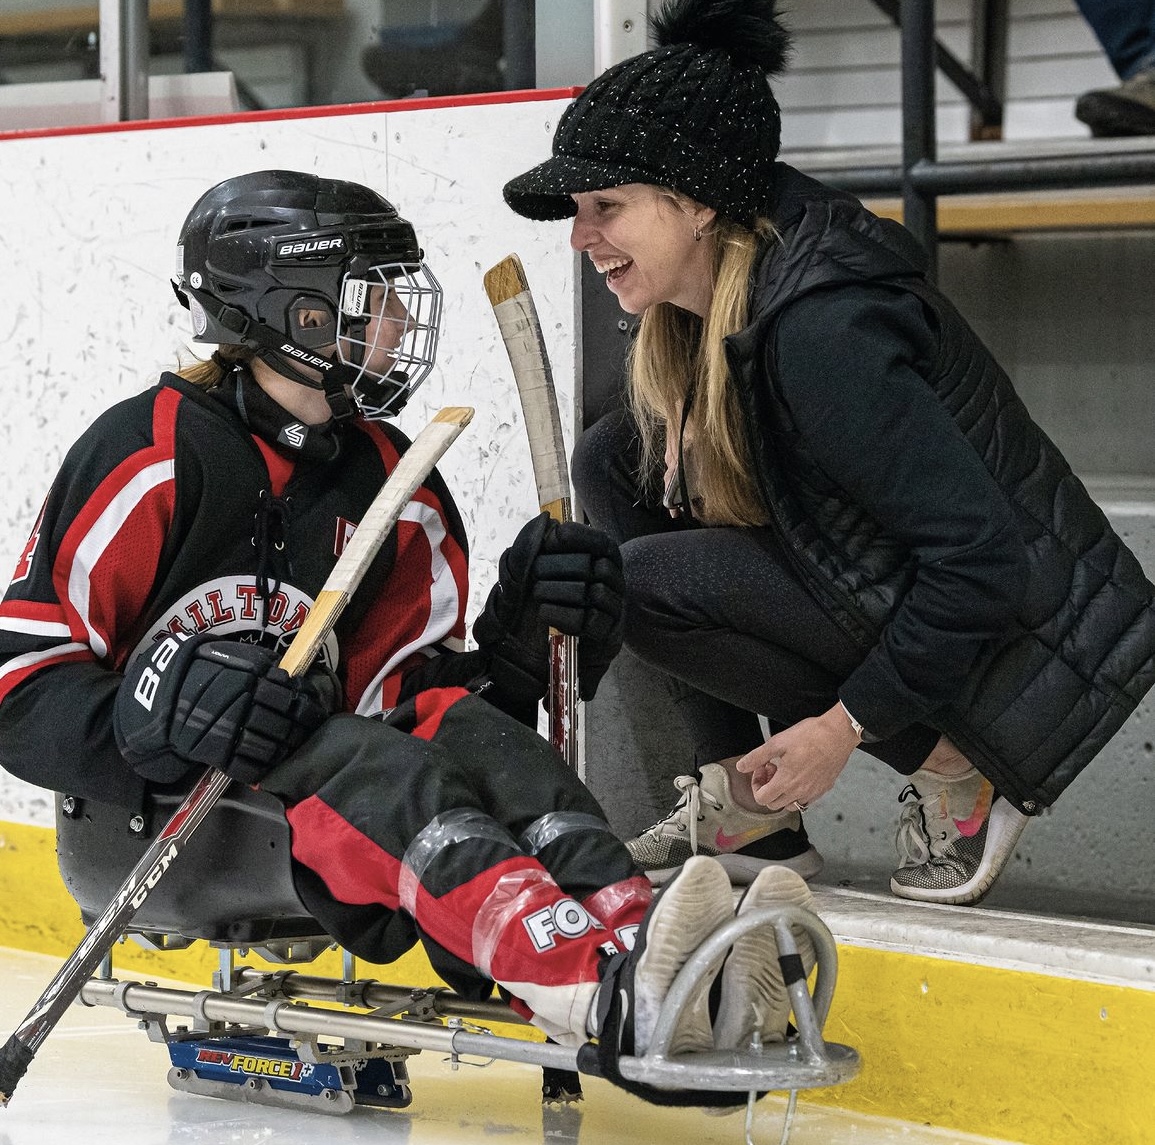 Jennifer Gallupe Roos, a white woman with long blonde hair, kneels at the open door of a bench at a hockey arena beside a young athlete in a sledge-hockey sledge. Jenn is wearing a black hat and black jacket, and the student wears a helmet and red and black gear.